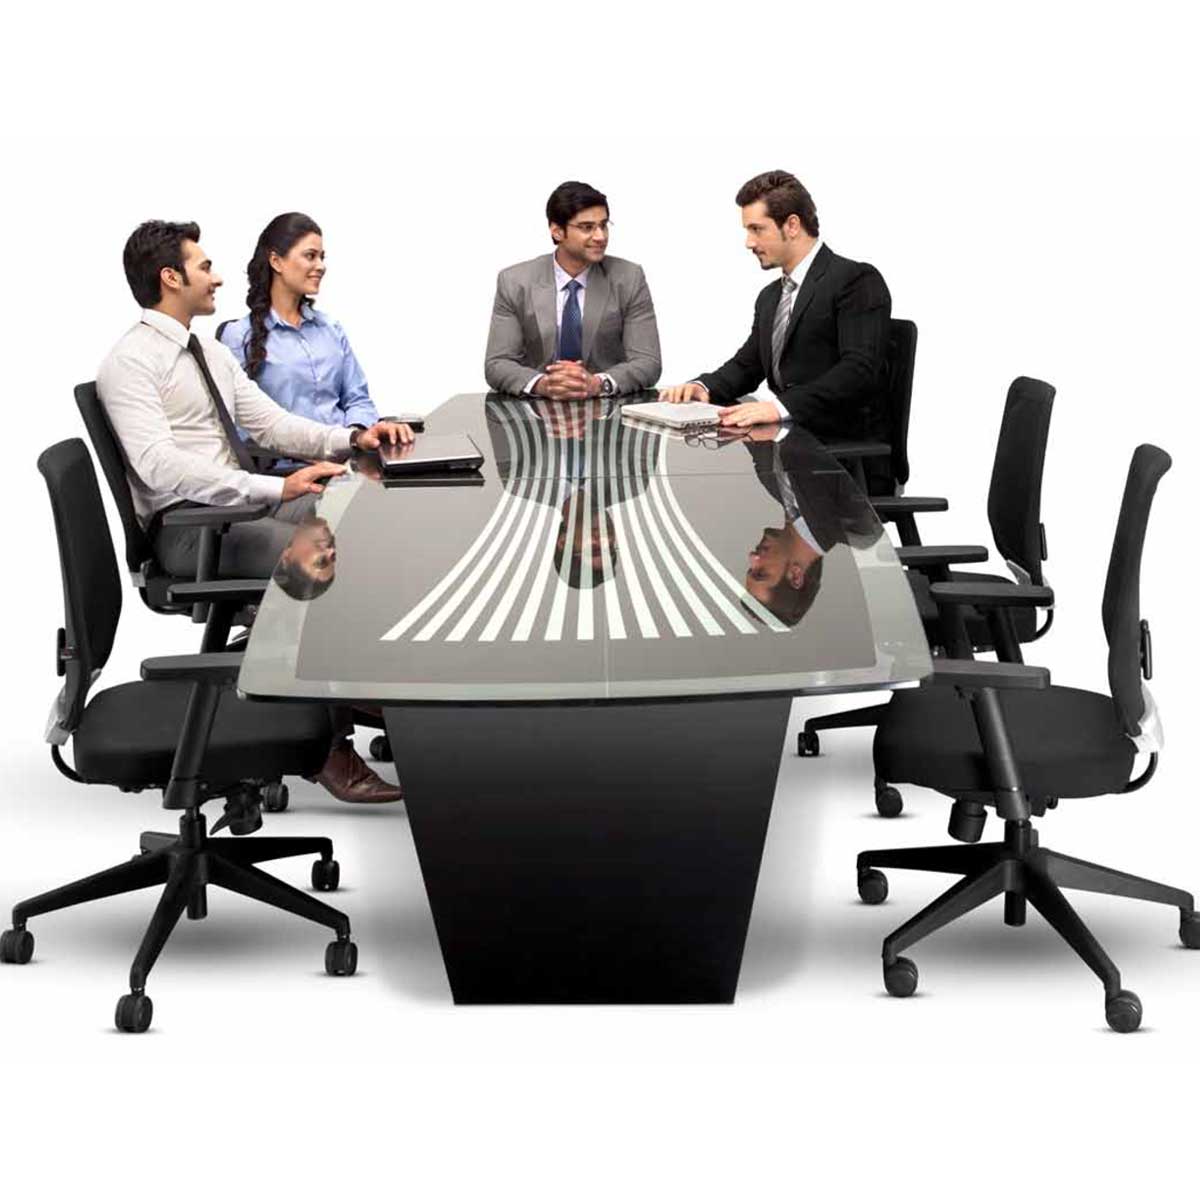 Metal Office Table Manufacturers, Suppliers in Aiims